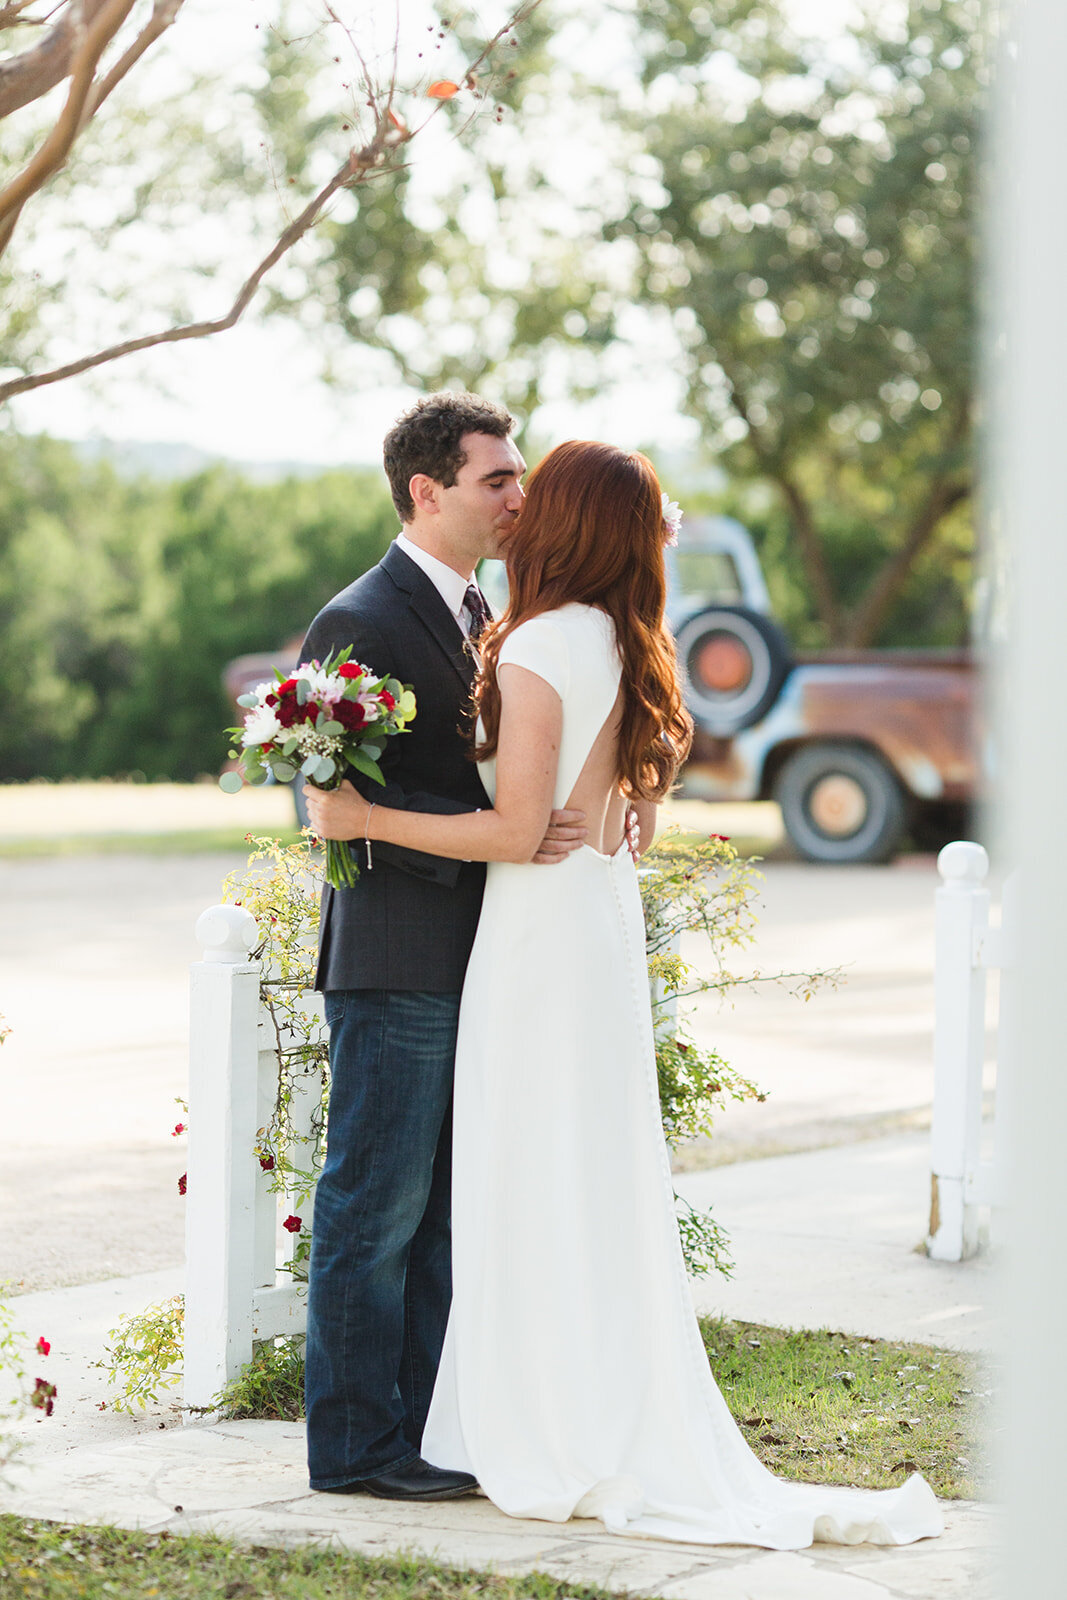 Best Engagement Photographer in Central Texas